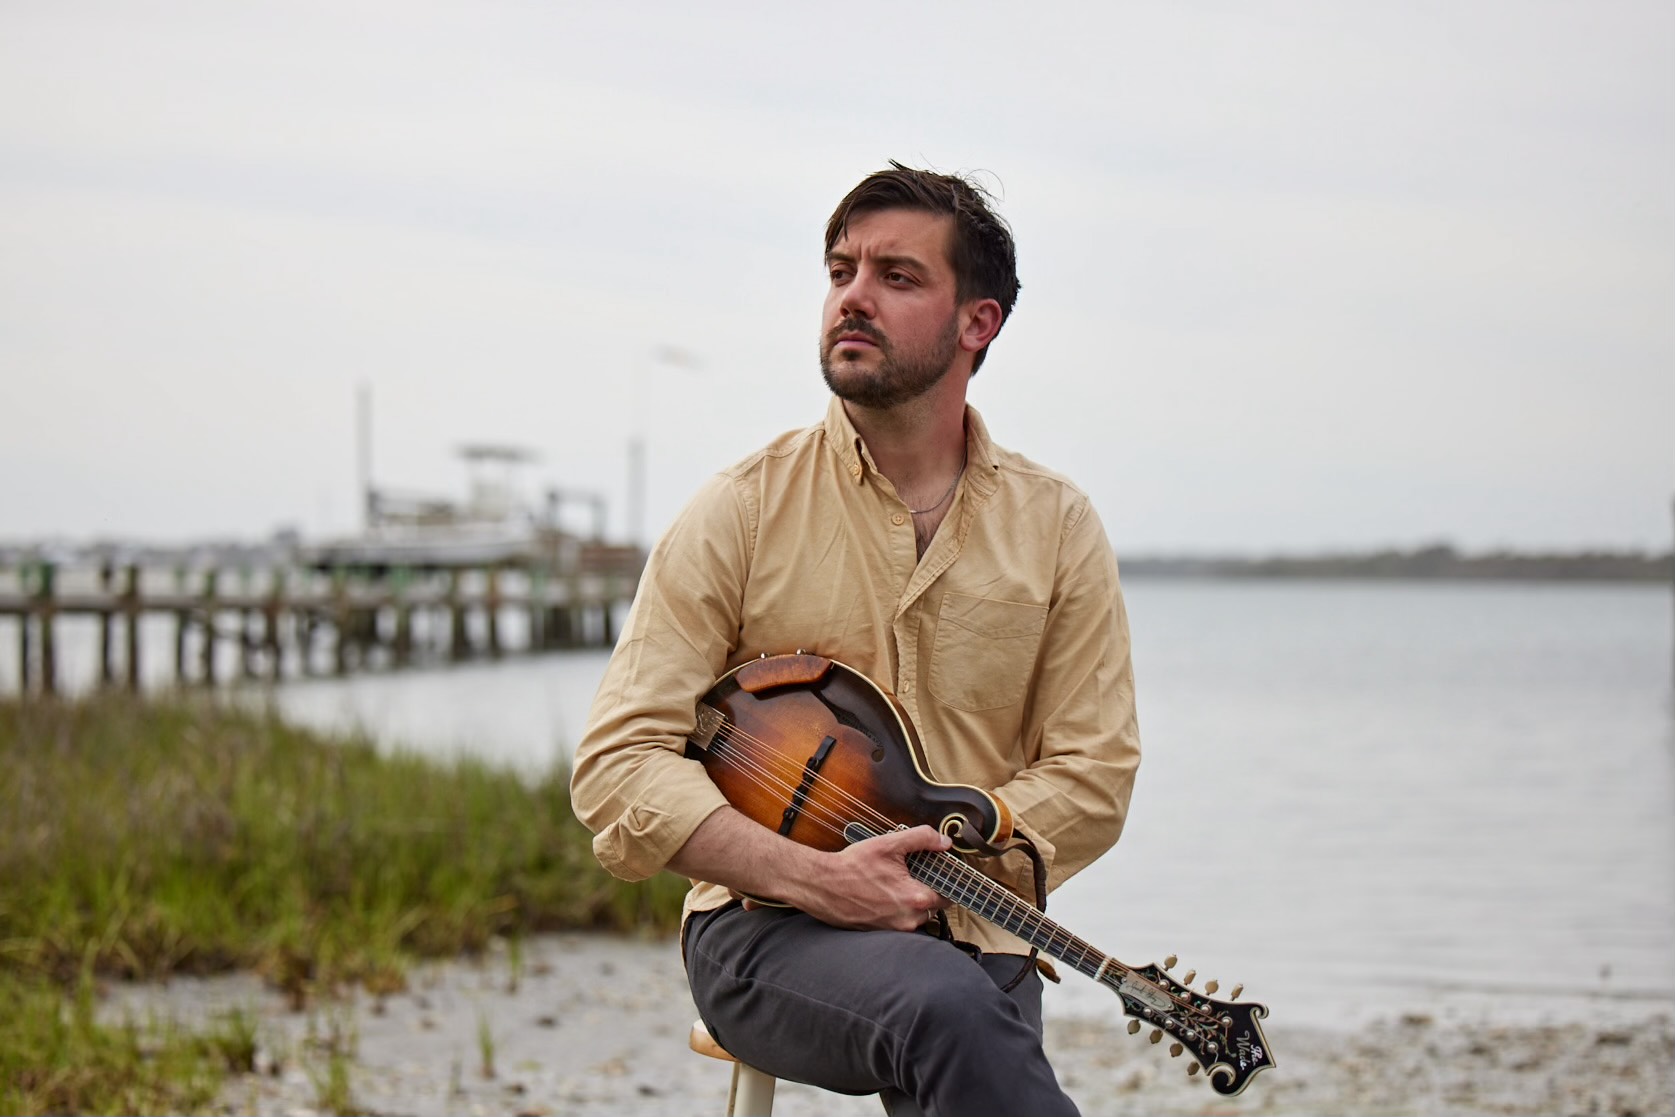 3x3: Alan Getto on the Bayou, the Banjo, and the Meaning of Be